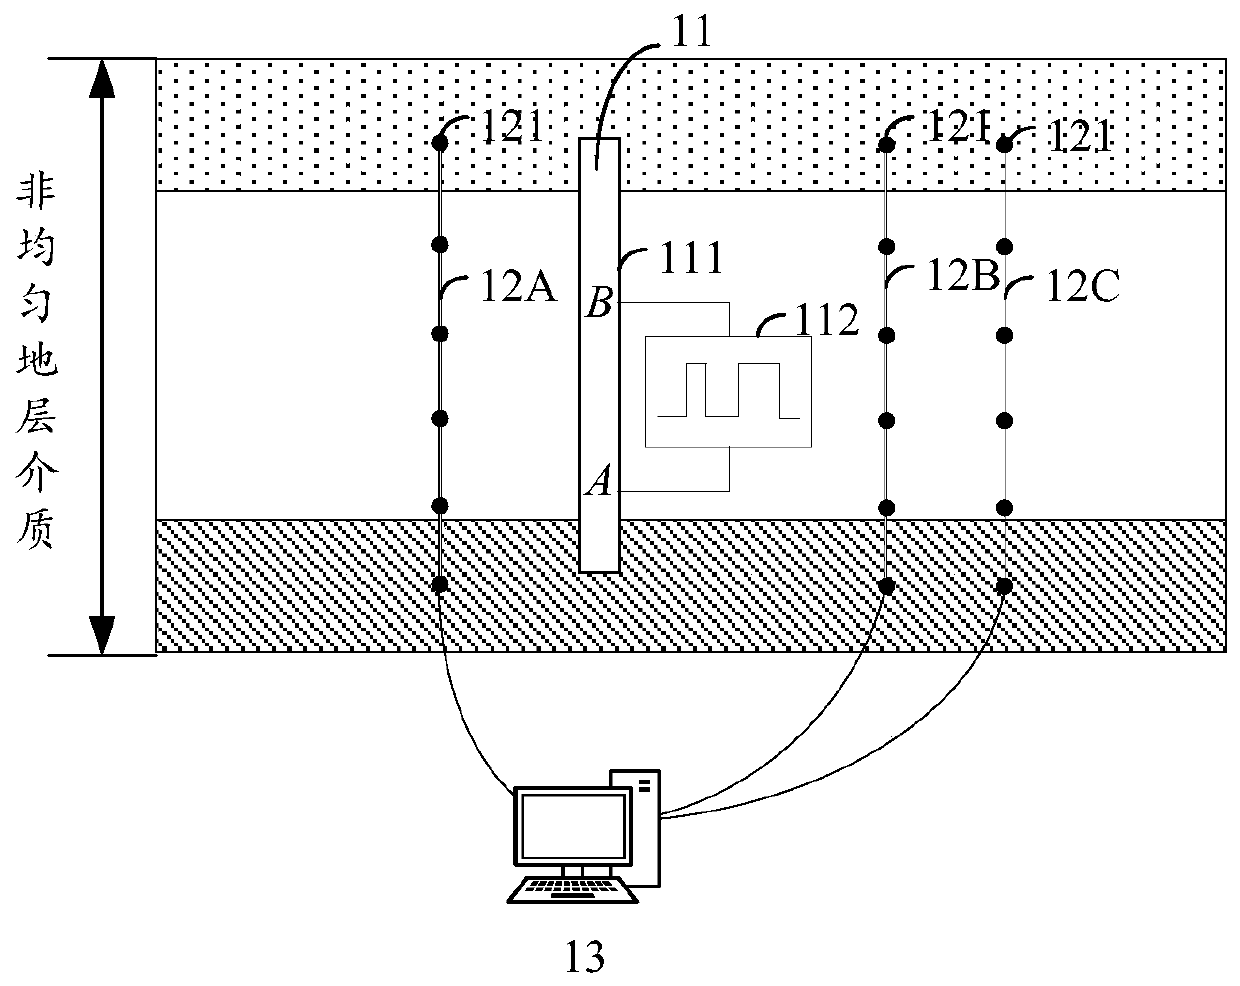 Inter-well electromagnetic detection system and method